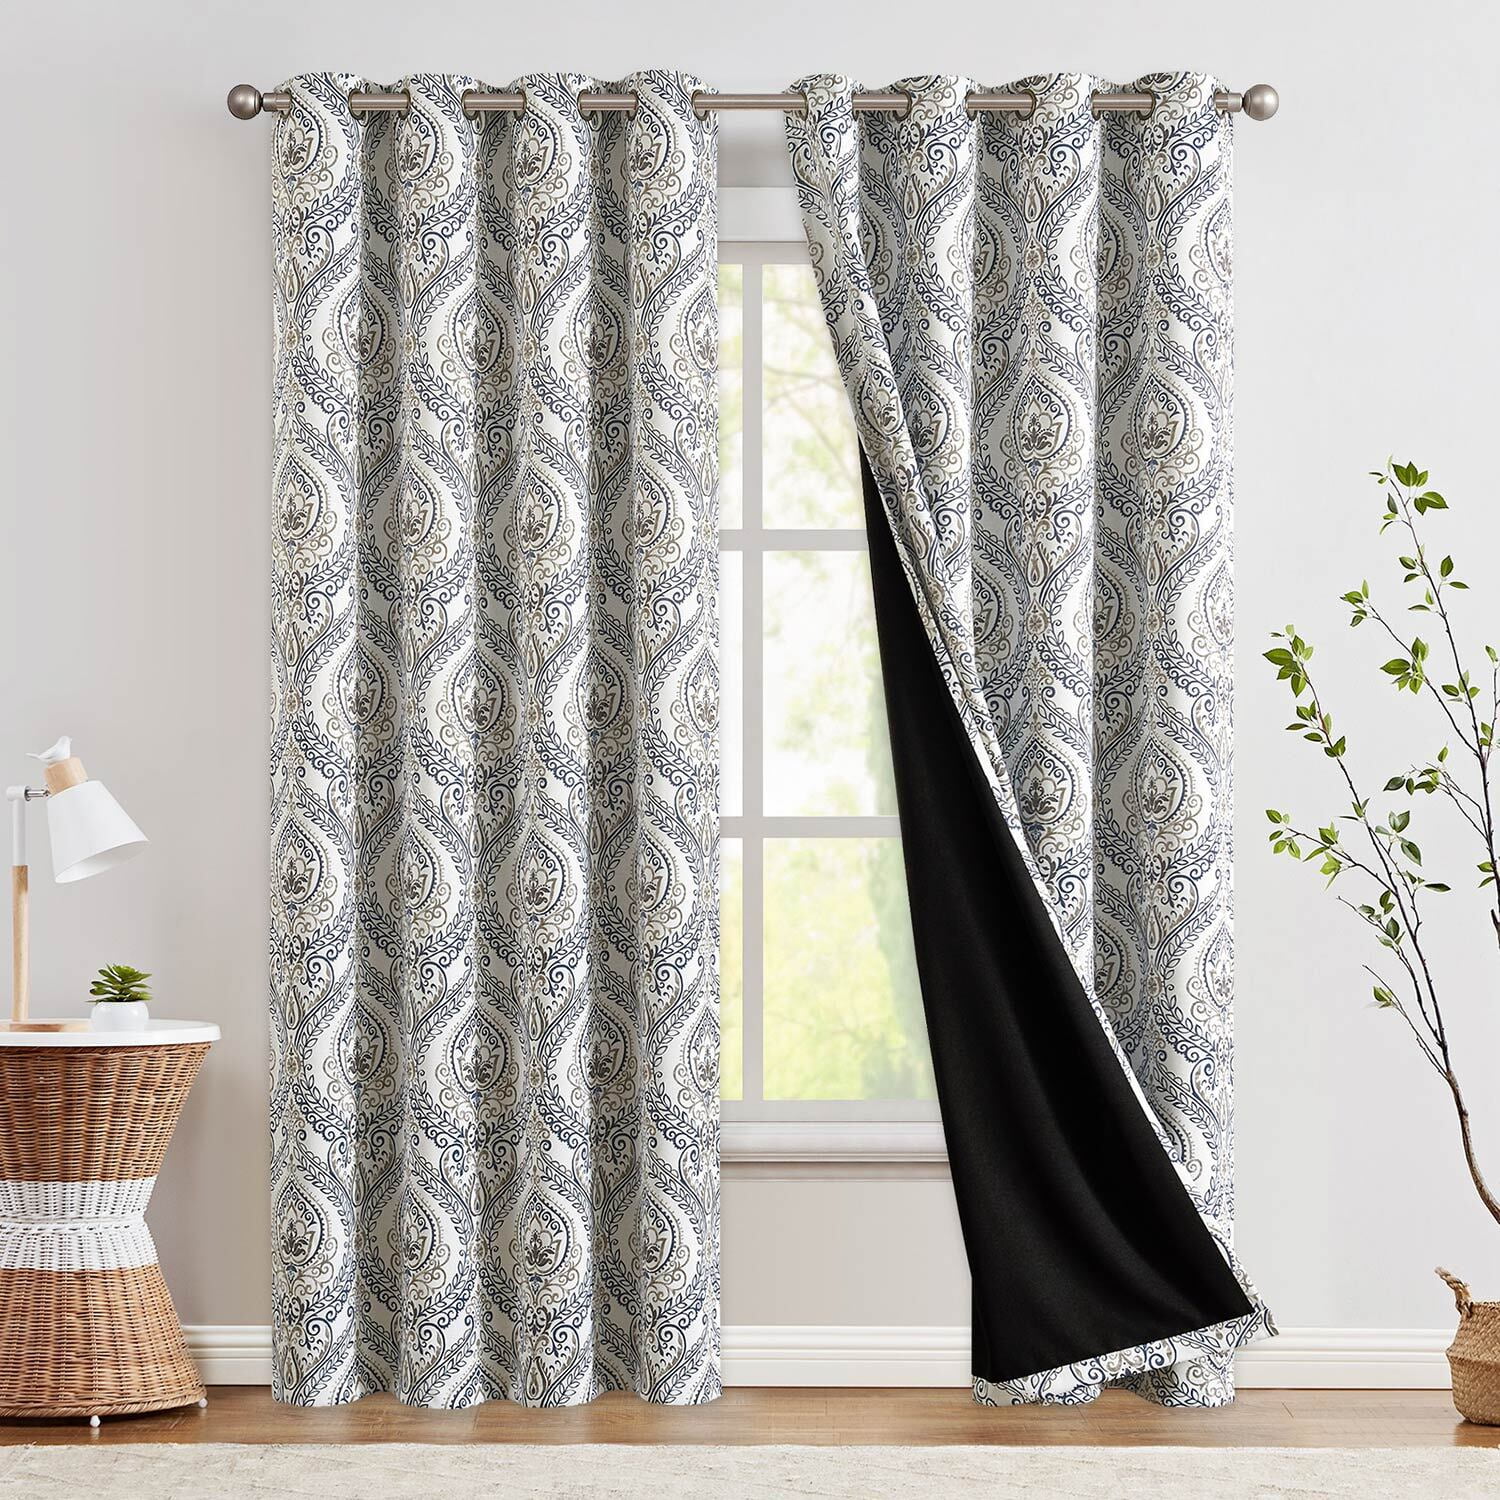 Curtainking 100 Blackout Curtains 84